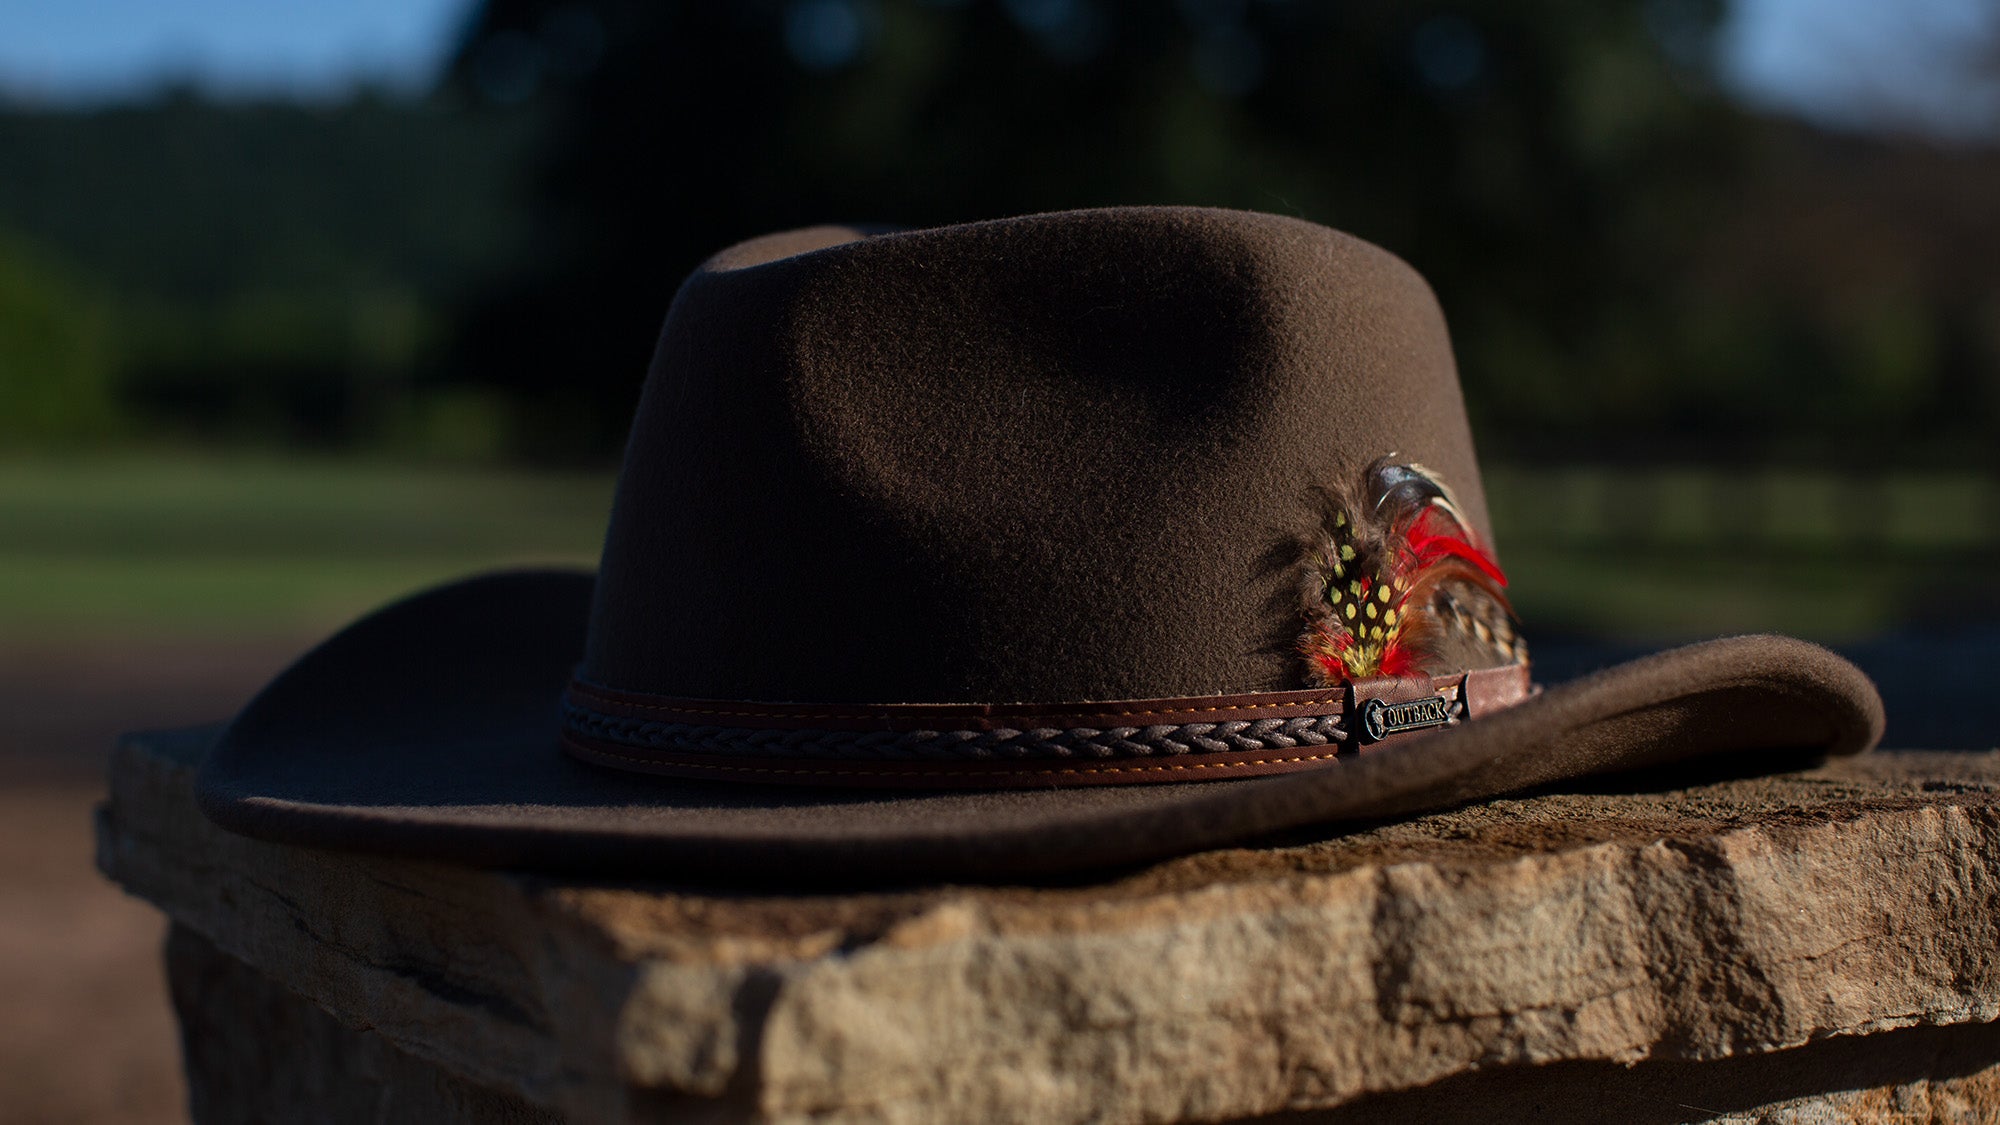 Outback Western Hat - Trading Company